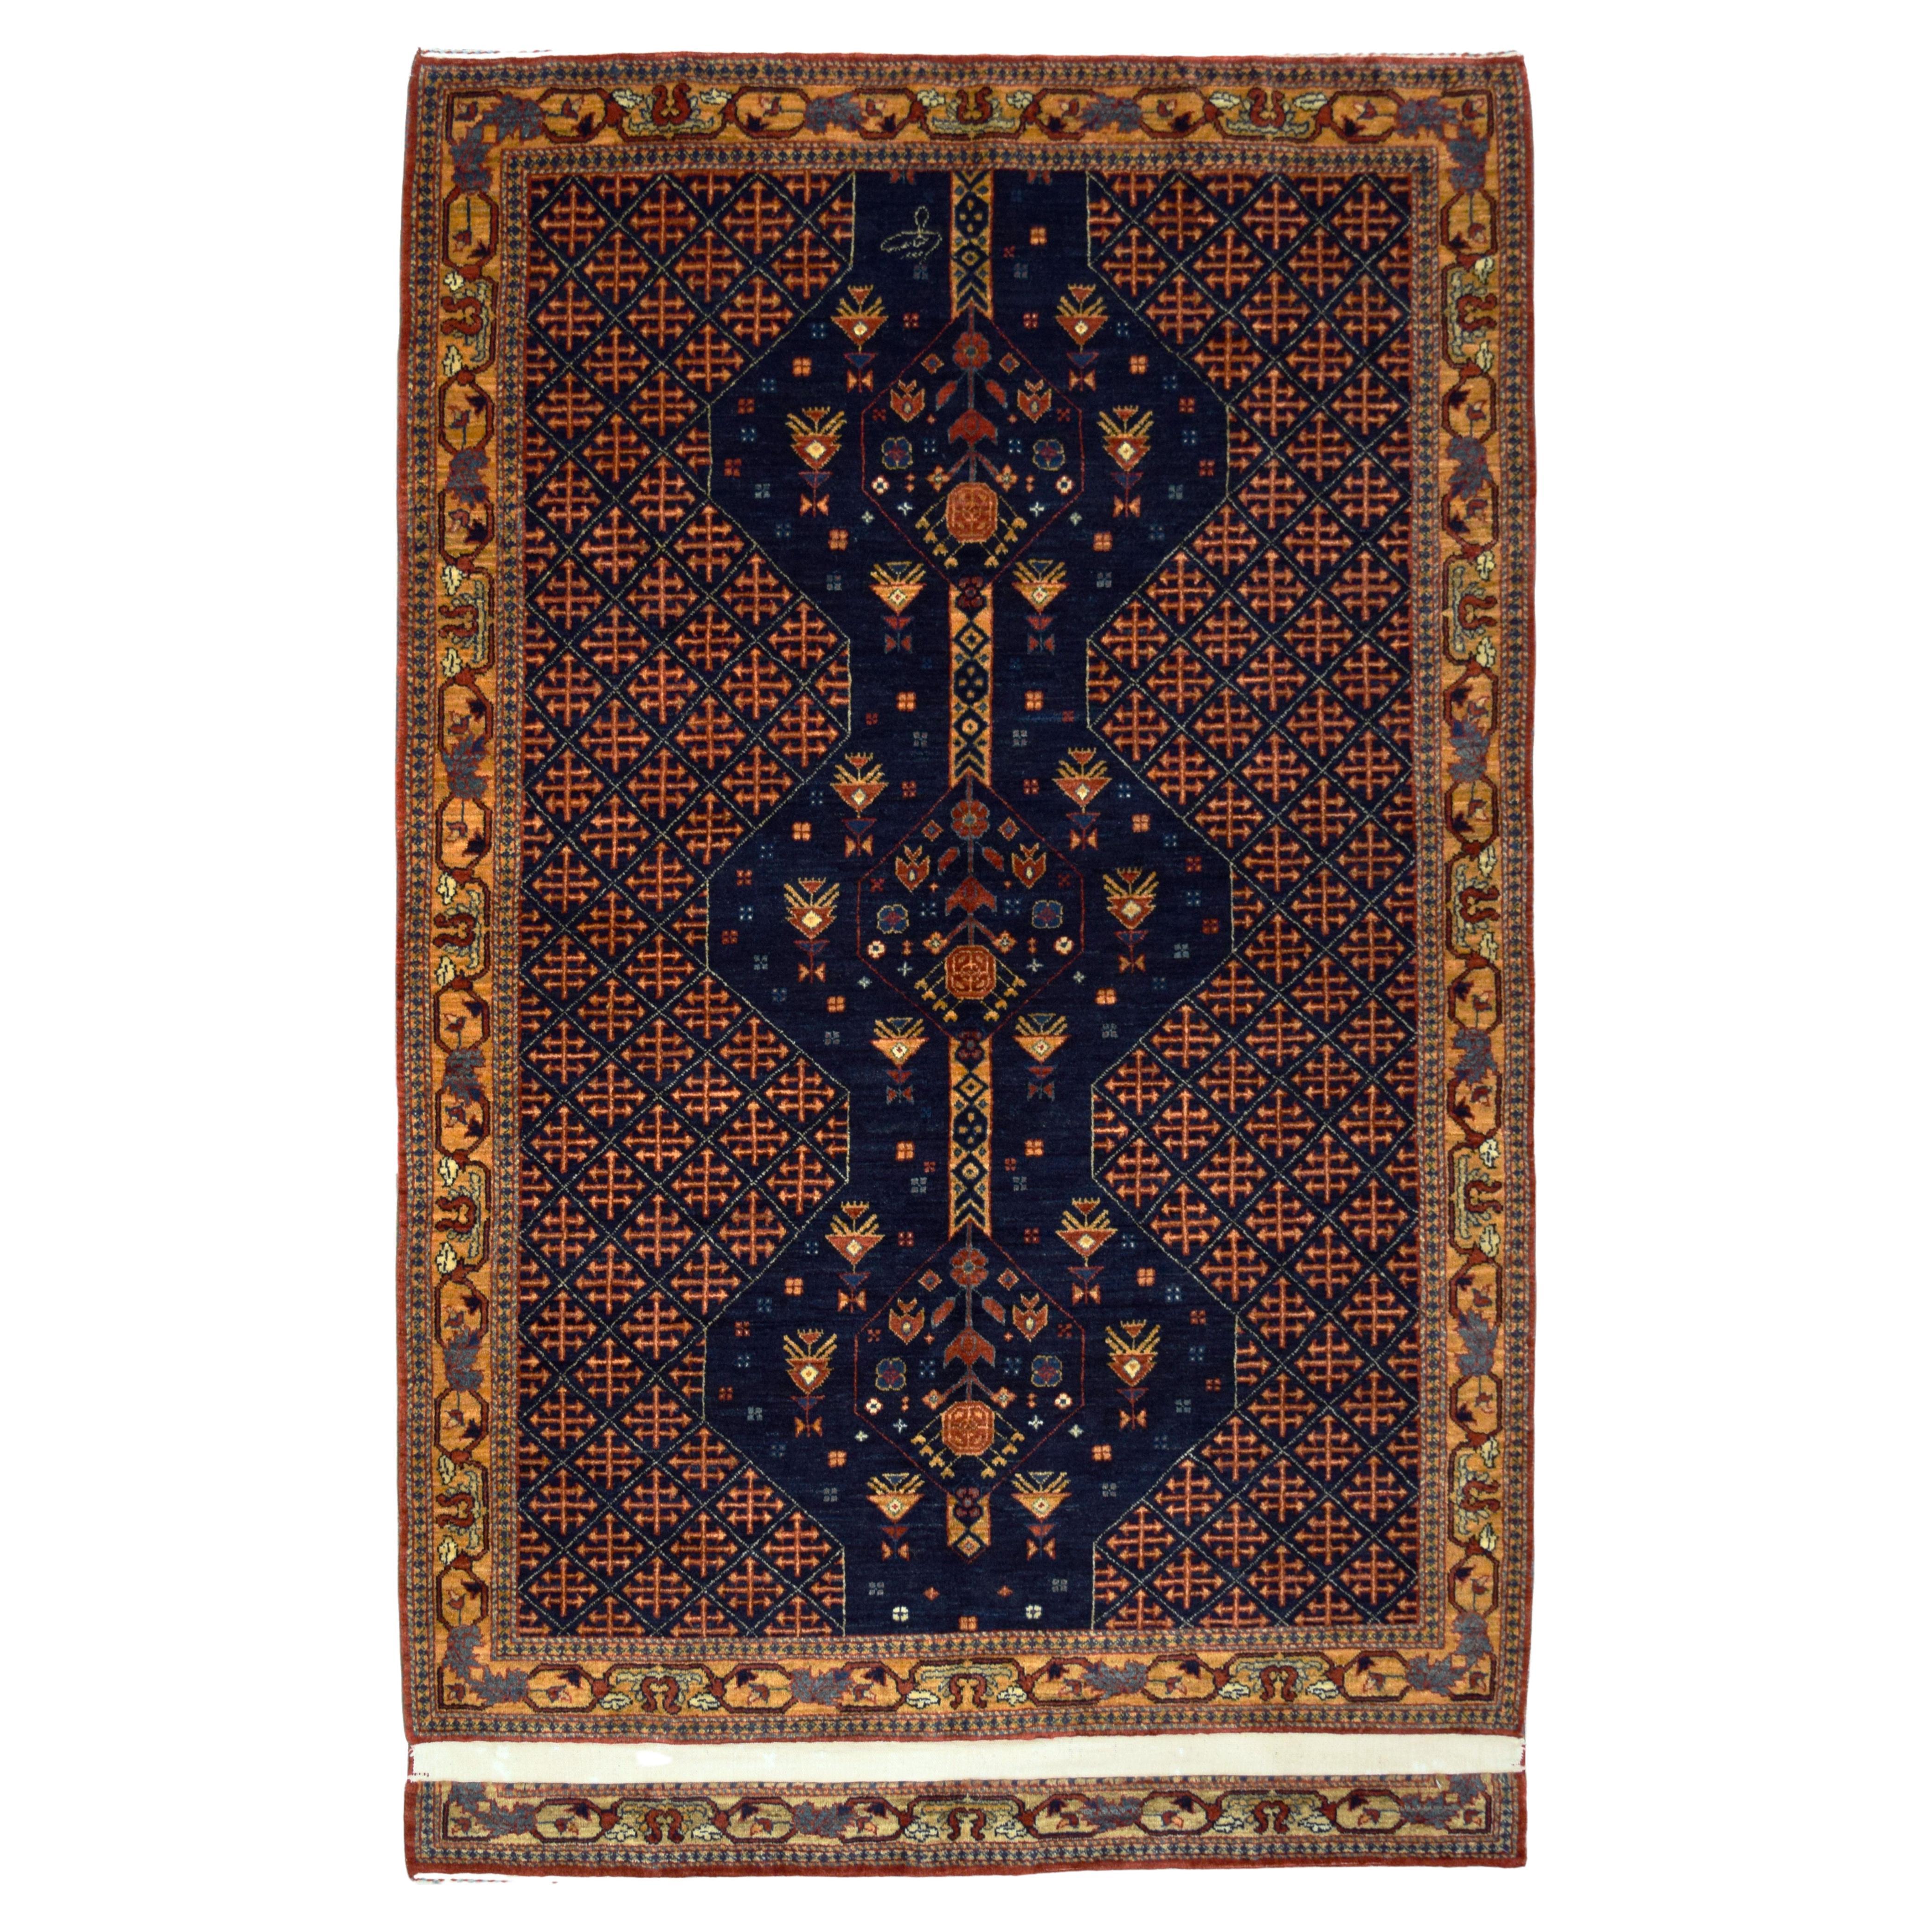 Qashqai Tribal Persian Rug in Indigo, Gold, Red, and Cream Wool 4' x 6'